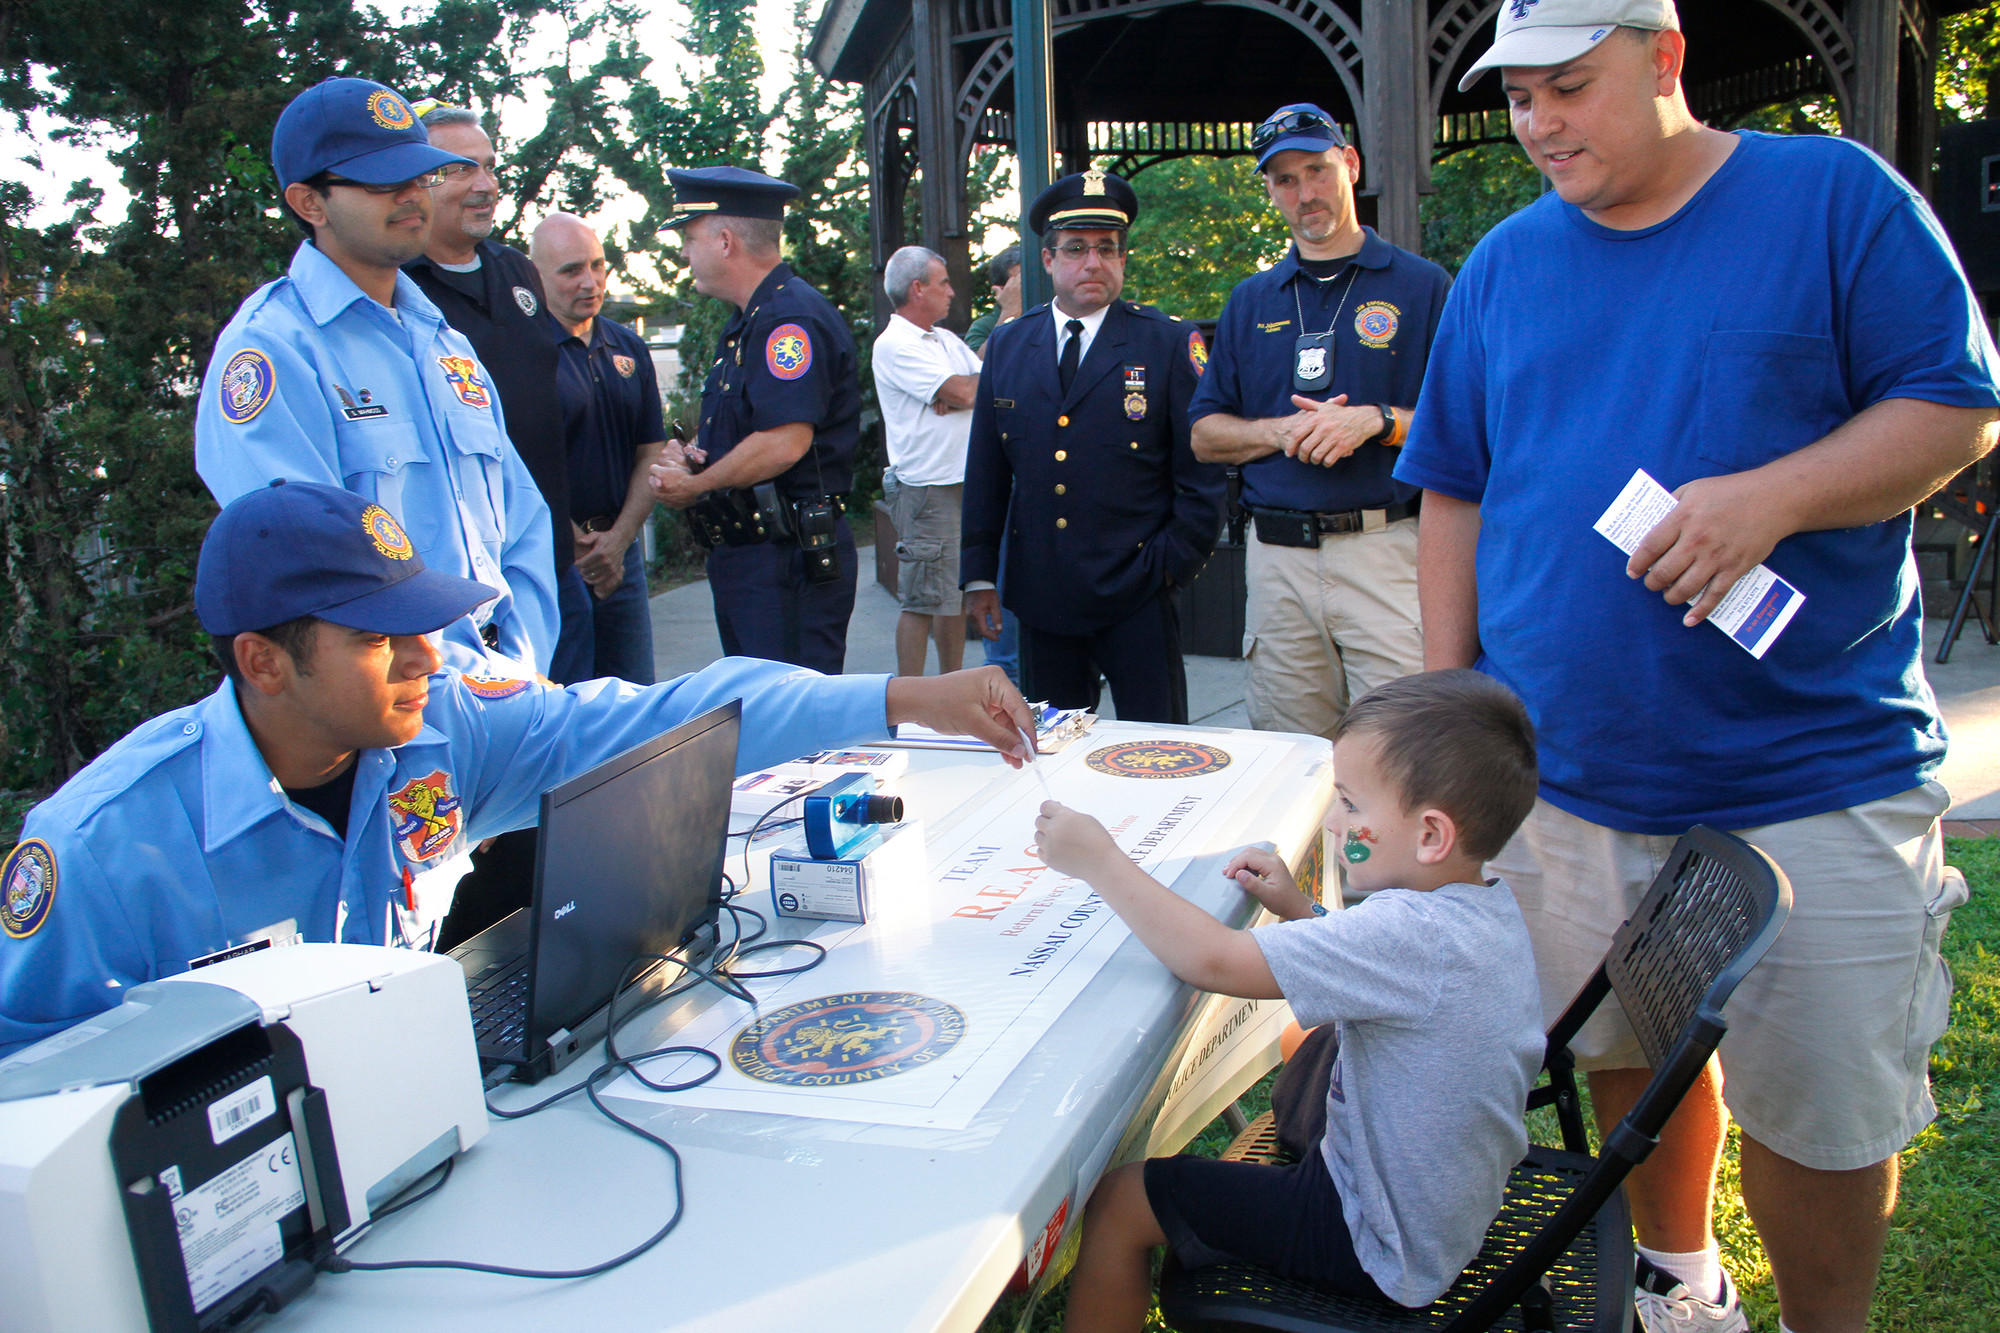 Nassau County Police Explorers were on hand to educate children about safety. Above, George Jaghab handed a Kid Pix ID card to Aiden Lazzarini.